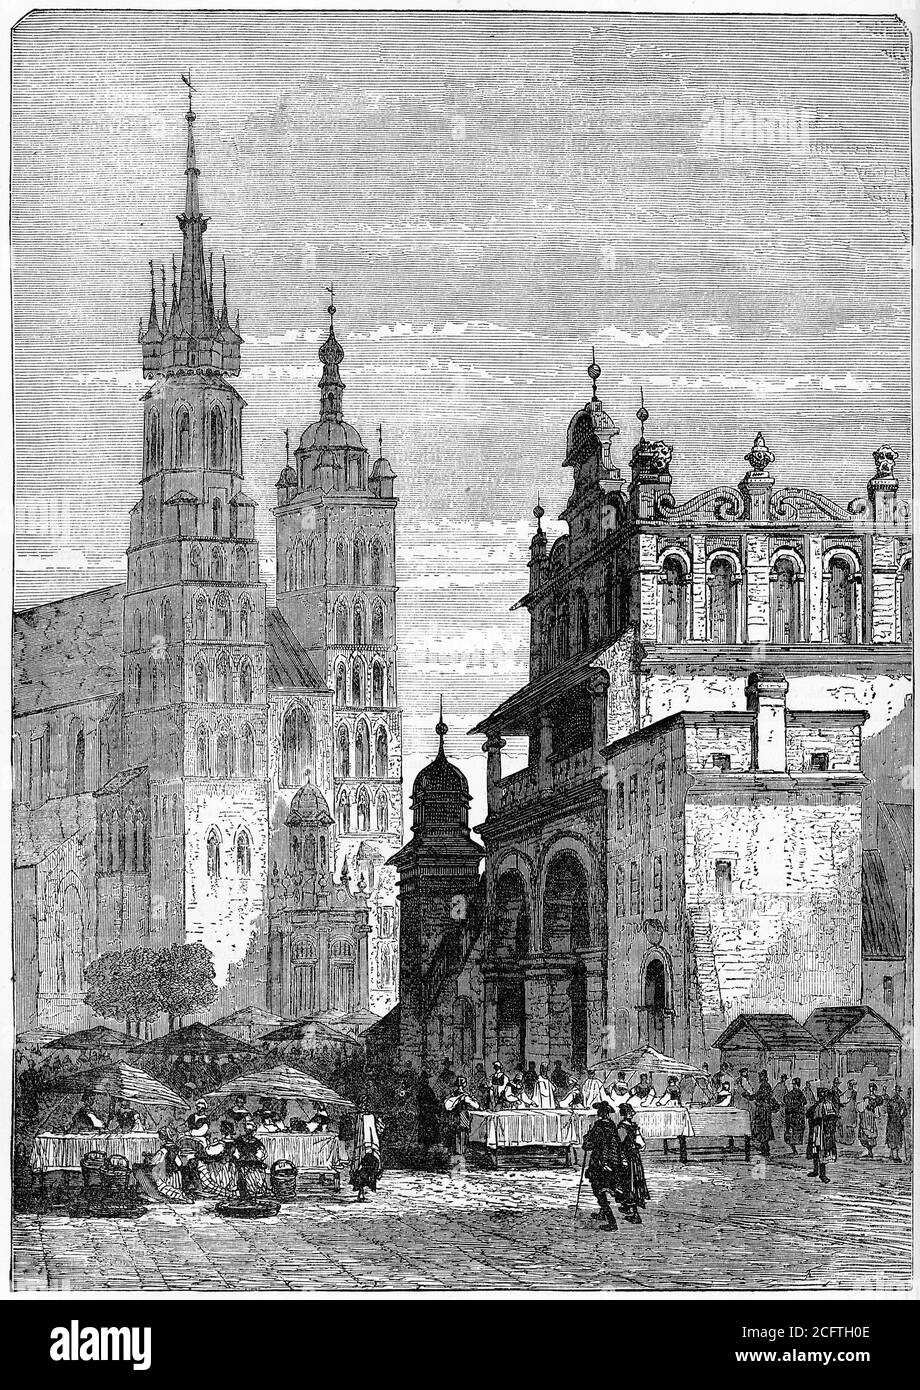 Engraving of the market place in Cracow, Poland, circa 1570. Illustration from 'The history of Protestantism' by James Aitken Wylie (1808-1890), pub. 1878 Stock Photo